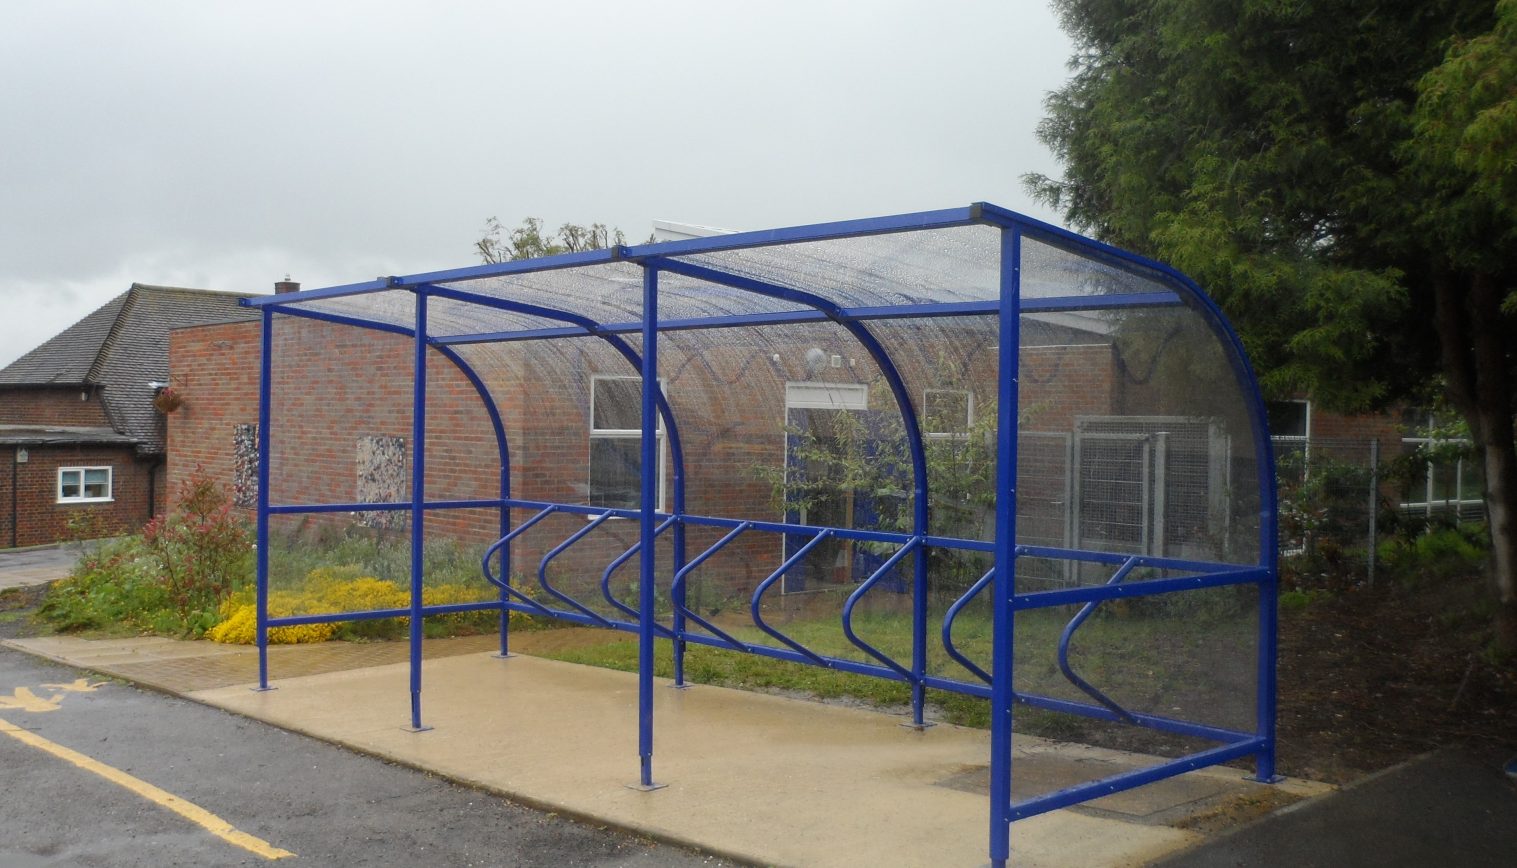 Sir John Lawes School – Cycle Shelter